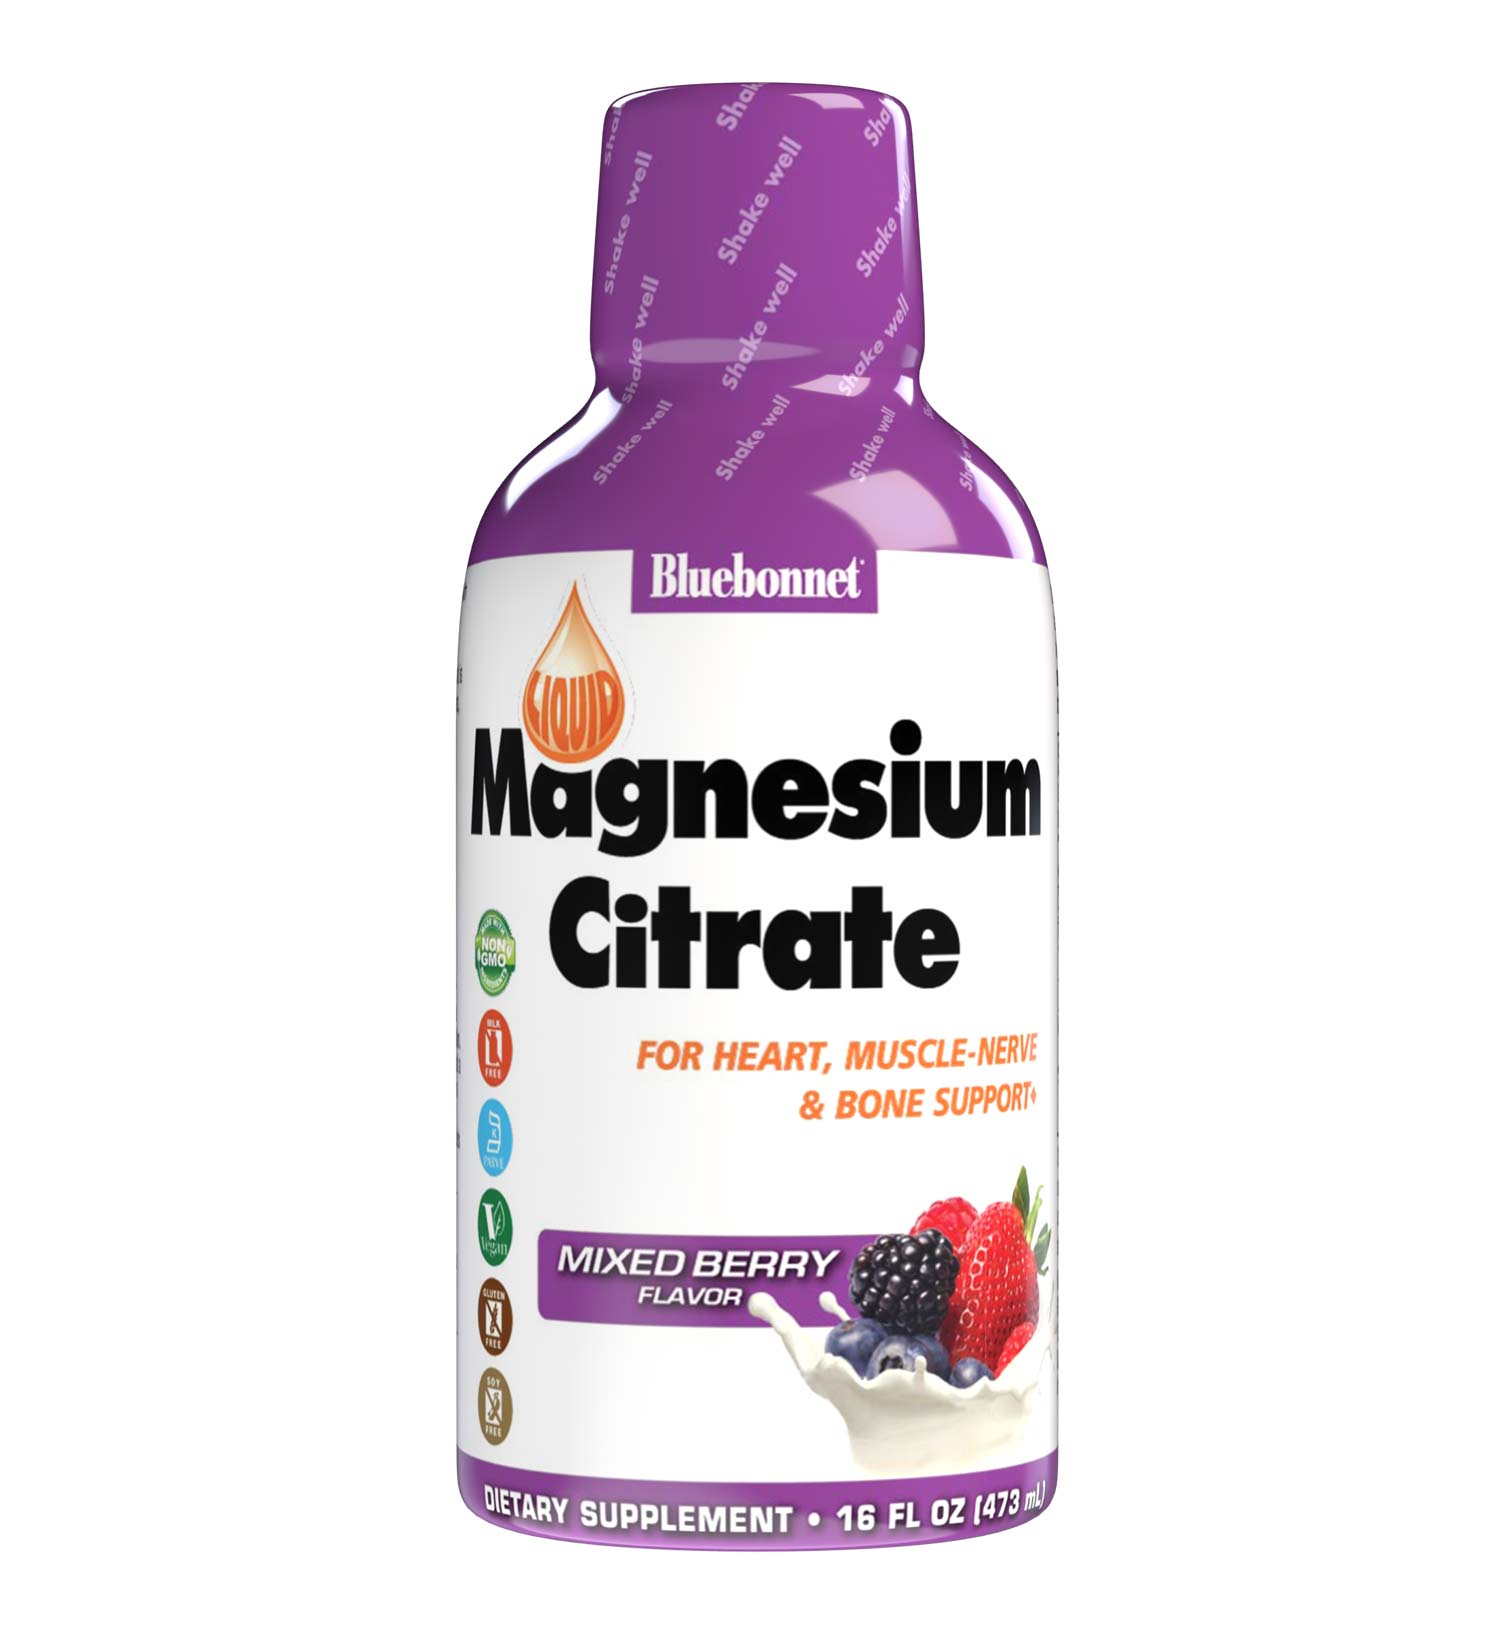 Bluebonnet's Liquid Magnesium Citrate is formulated with a special, water-soluble form of magnesium chelated to citrate. Magnesium is required in over 300 biochemical reactions in the body but is primarily known to calm the mind and body, reduce stress, induce restful sleep, increase bone density, as well as support immune and cardiovascular health. Delicious mixed berry flavor. #size_16 fl oz (473 mL)